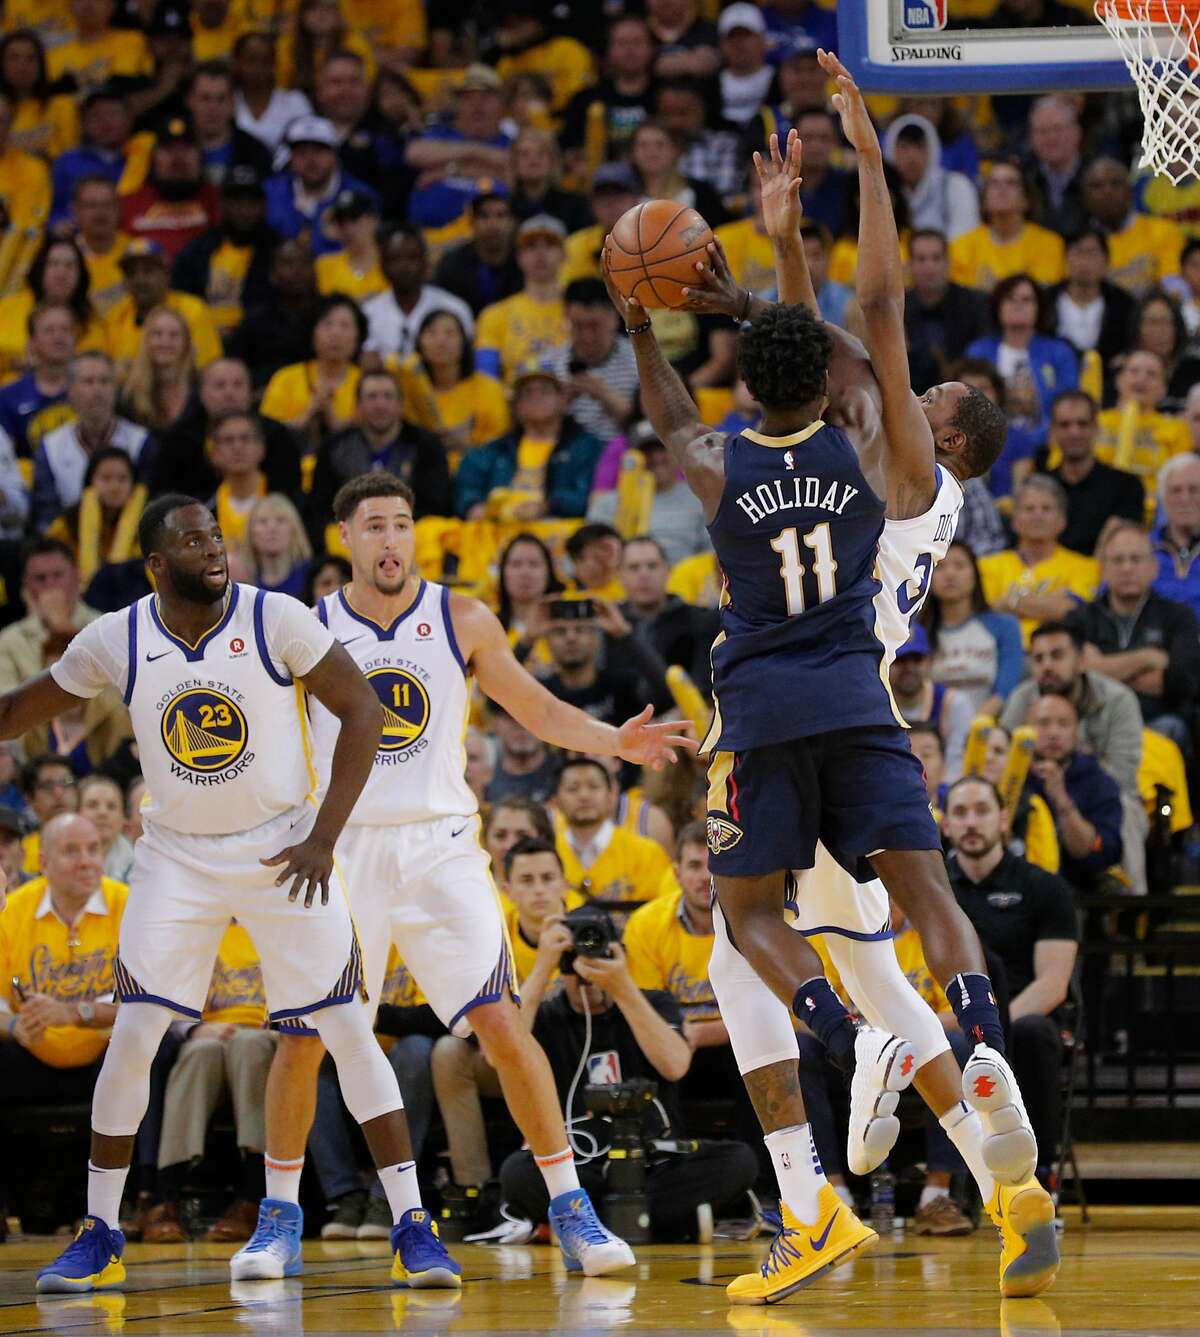 New Orleans Pelicans' Jrue Holiday is fouled by Golden State Warriors' Kevin Durant in the second quarter during game 5 of the Western Conference Semifinals between the Golden State Warriors and the New Orleans Pelicans at Oracle Arena on Tuesday, May 8, 2018 in Oakland, Calif.